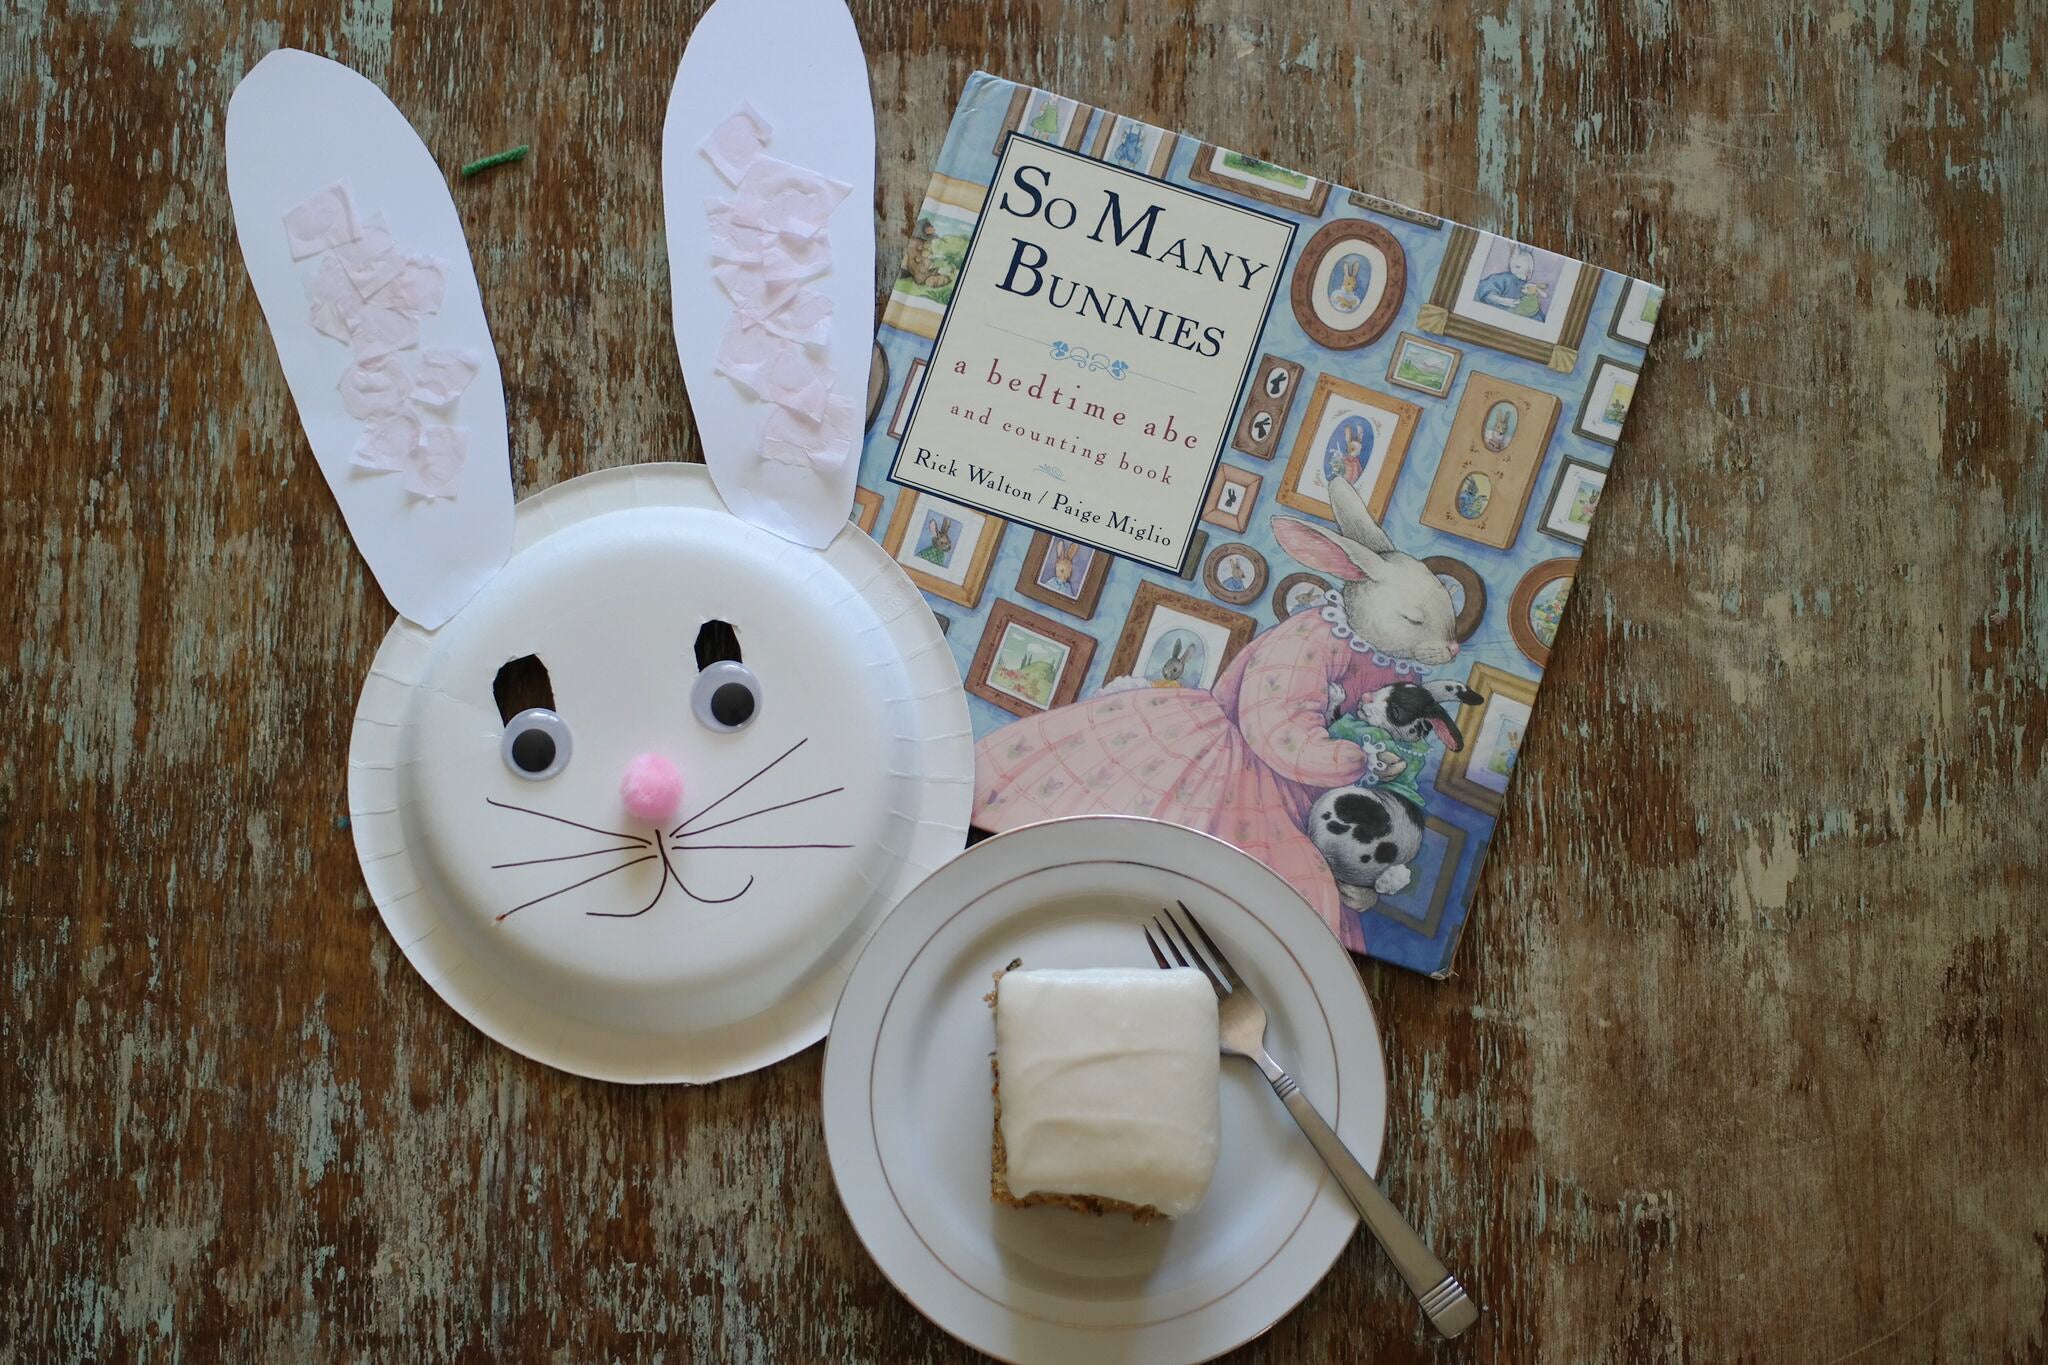 A homeschool project bunny mask, next too a piece of carrot cake and the book "So Many Bunnies" by Rick Walton and Paige Miglio.